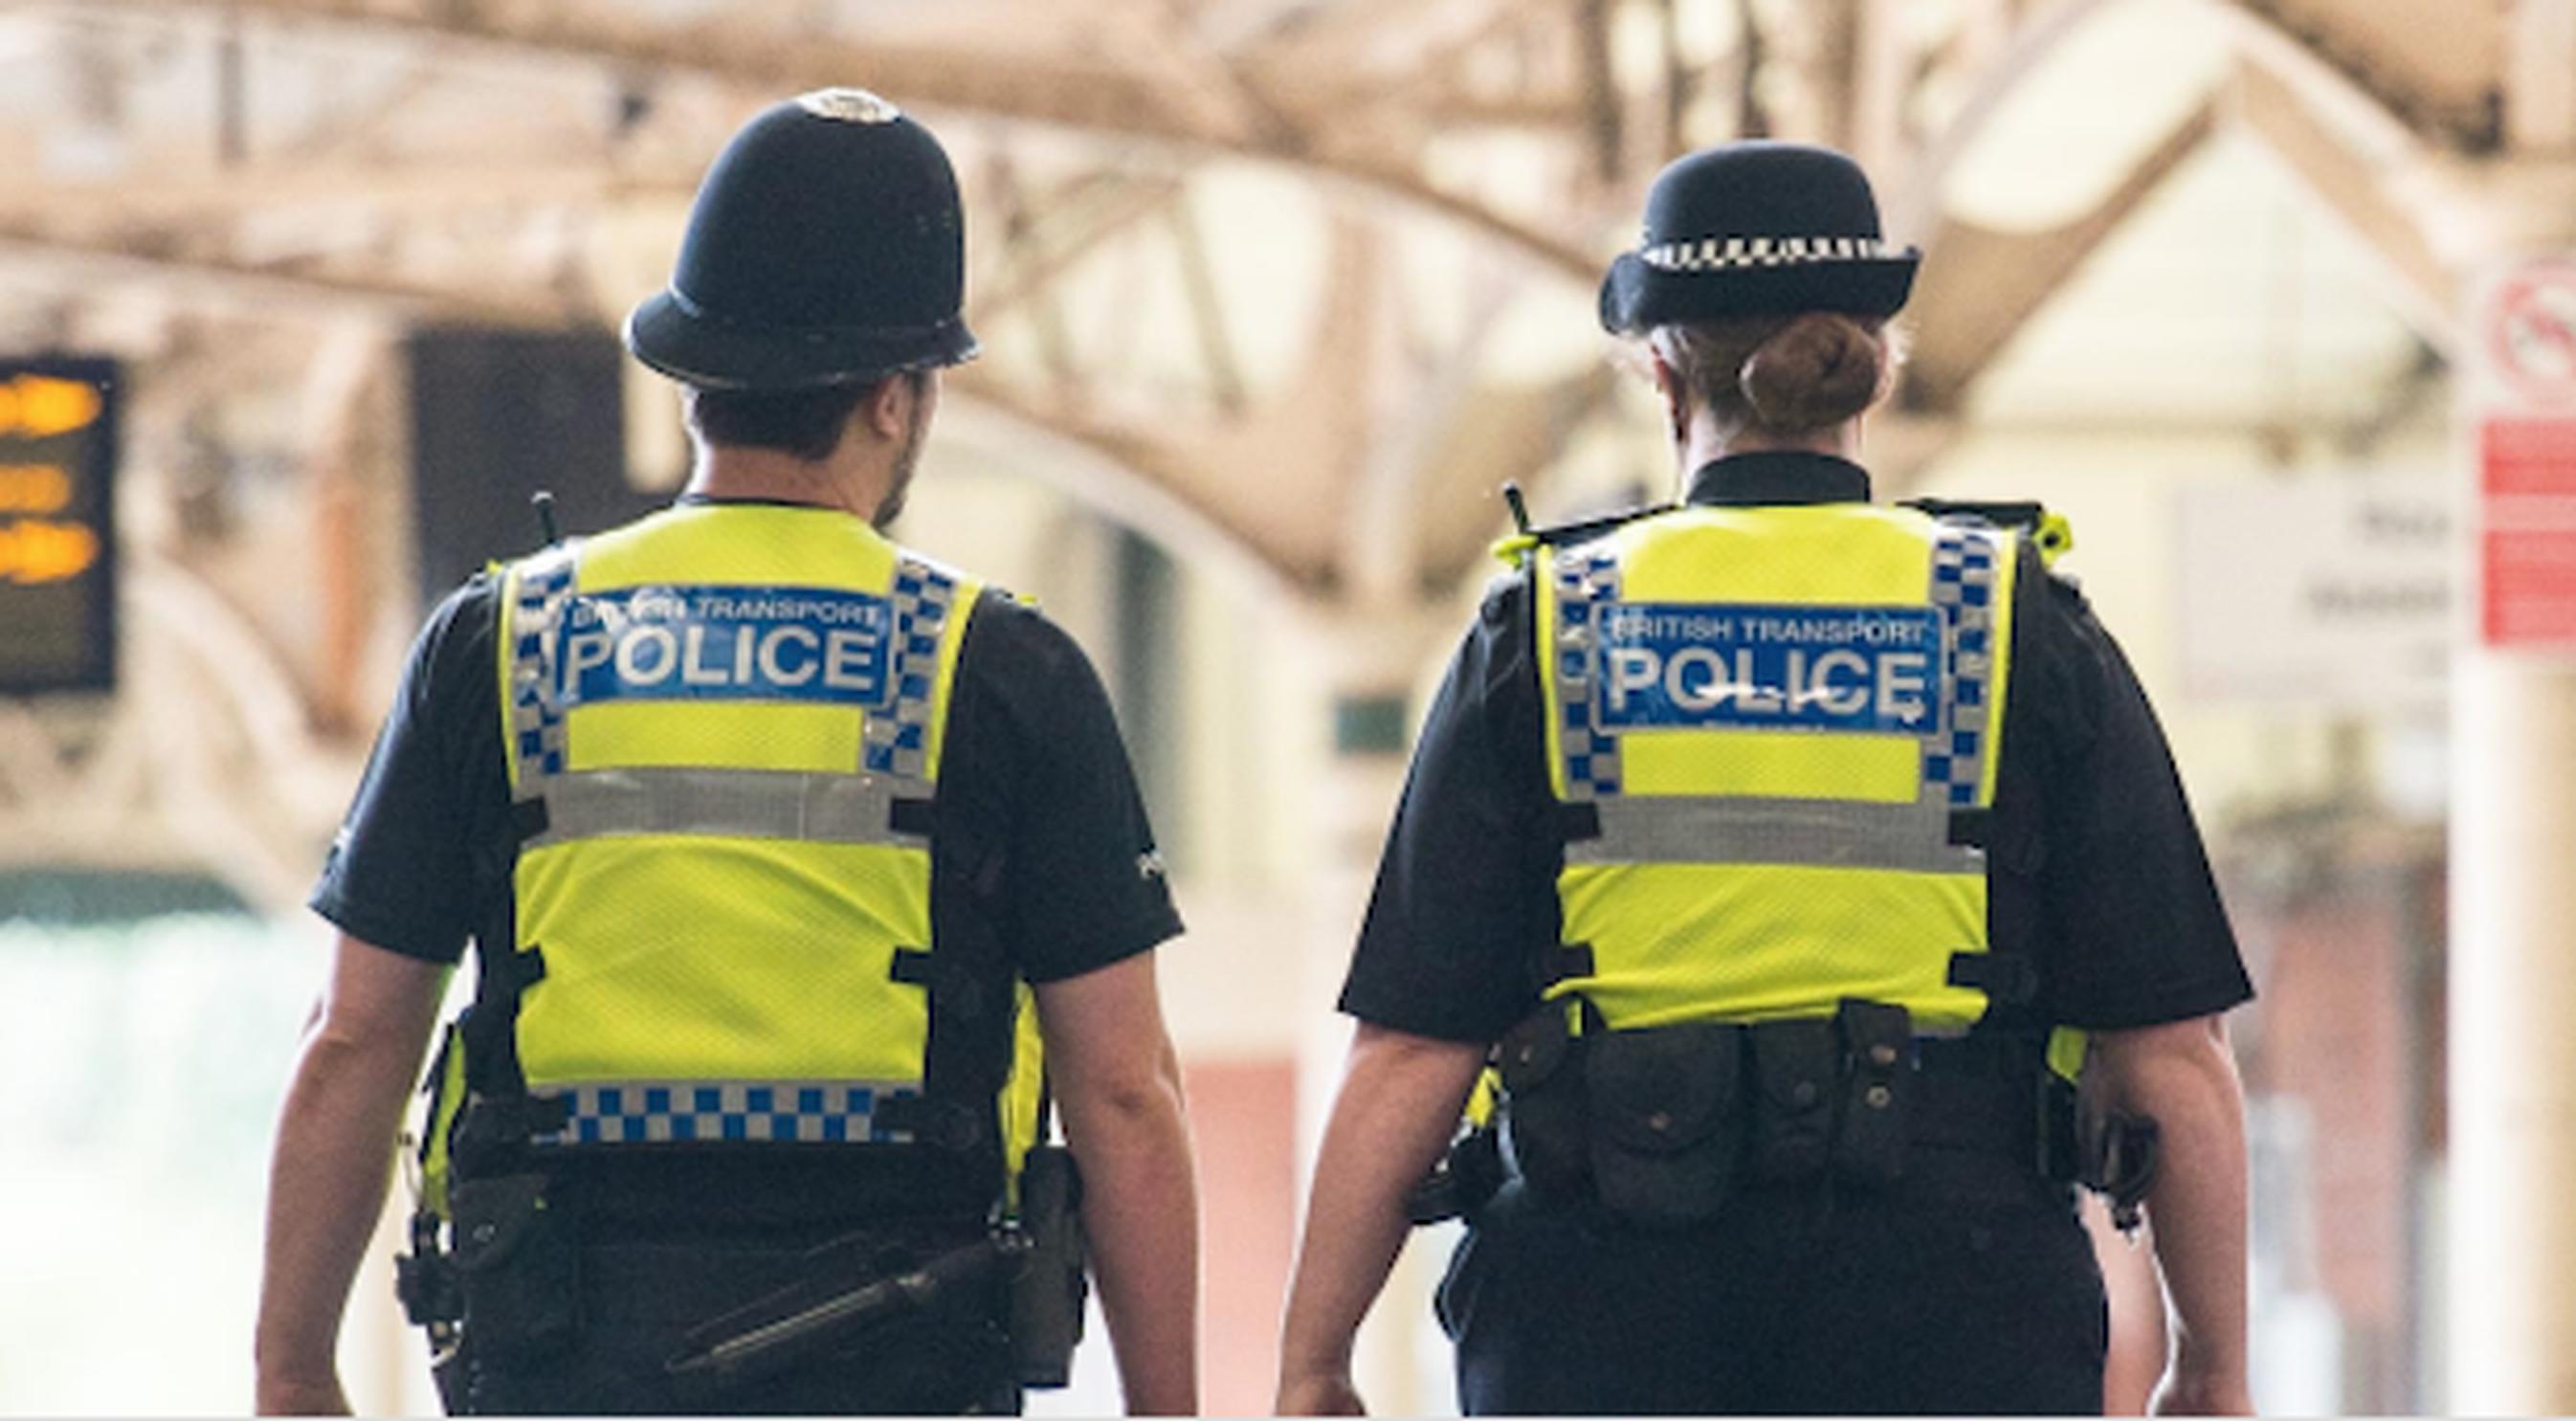 500 BTP officers will be deployed across the UK rail network to advise travellers on new restrictions